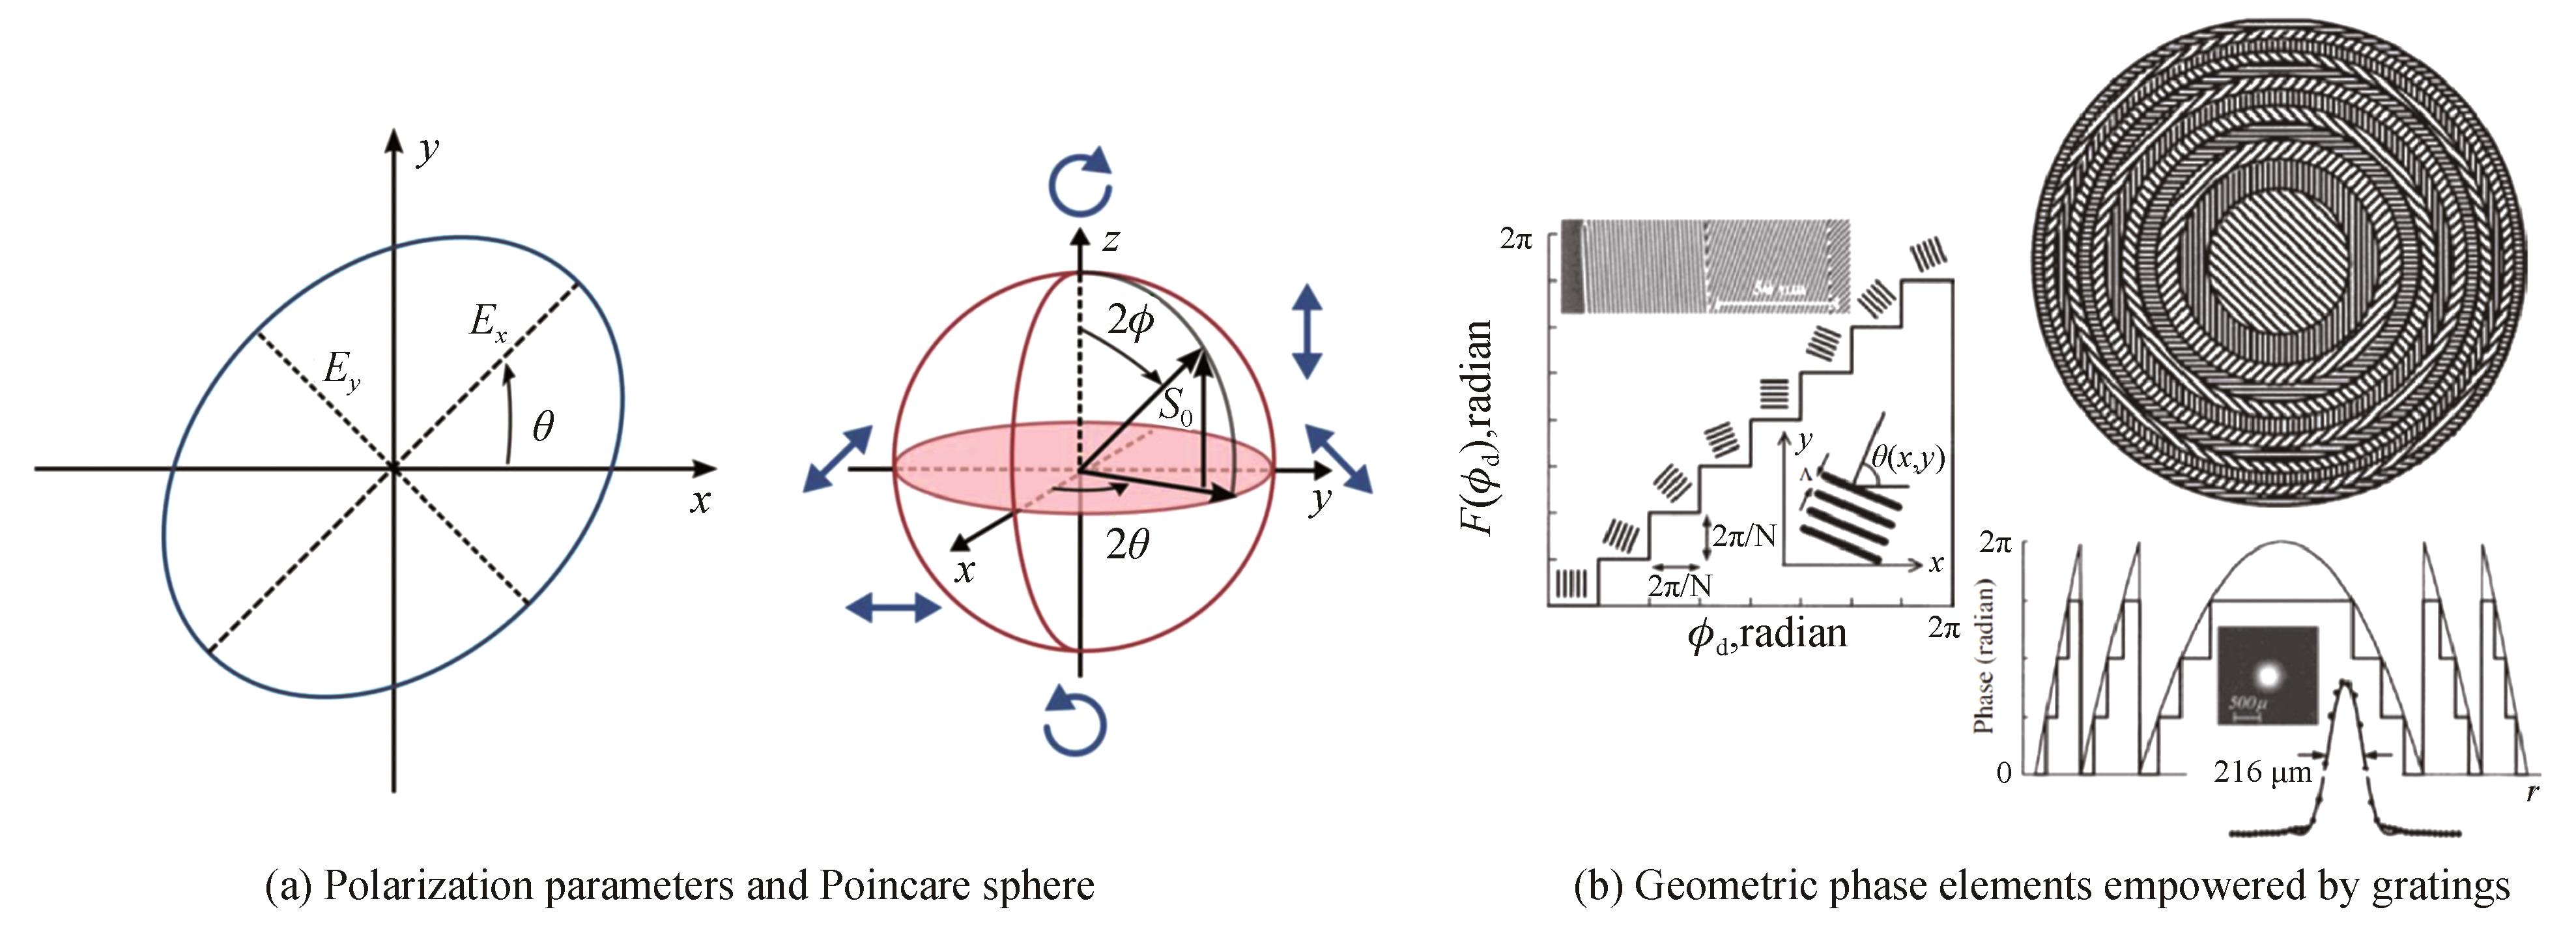 The schematic on the fabrication of polarization convertors and geometric phase elements［19］